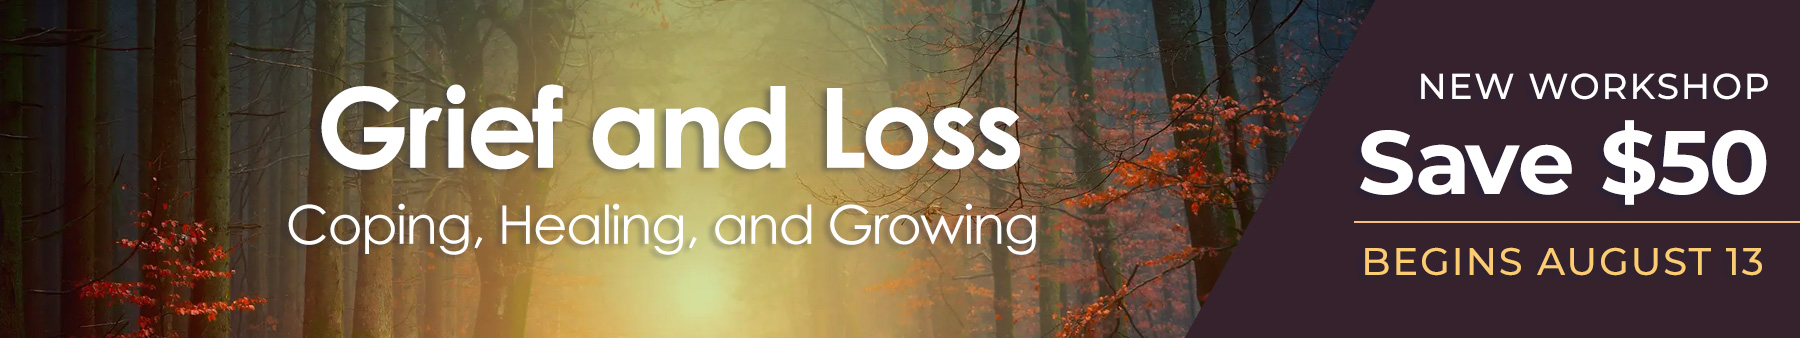 Grief and Loss - Coping, Healing, and Growing: Save $50